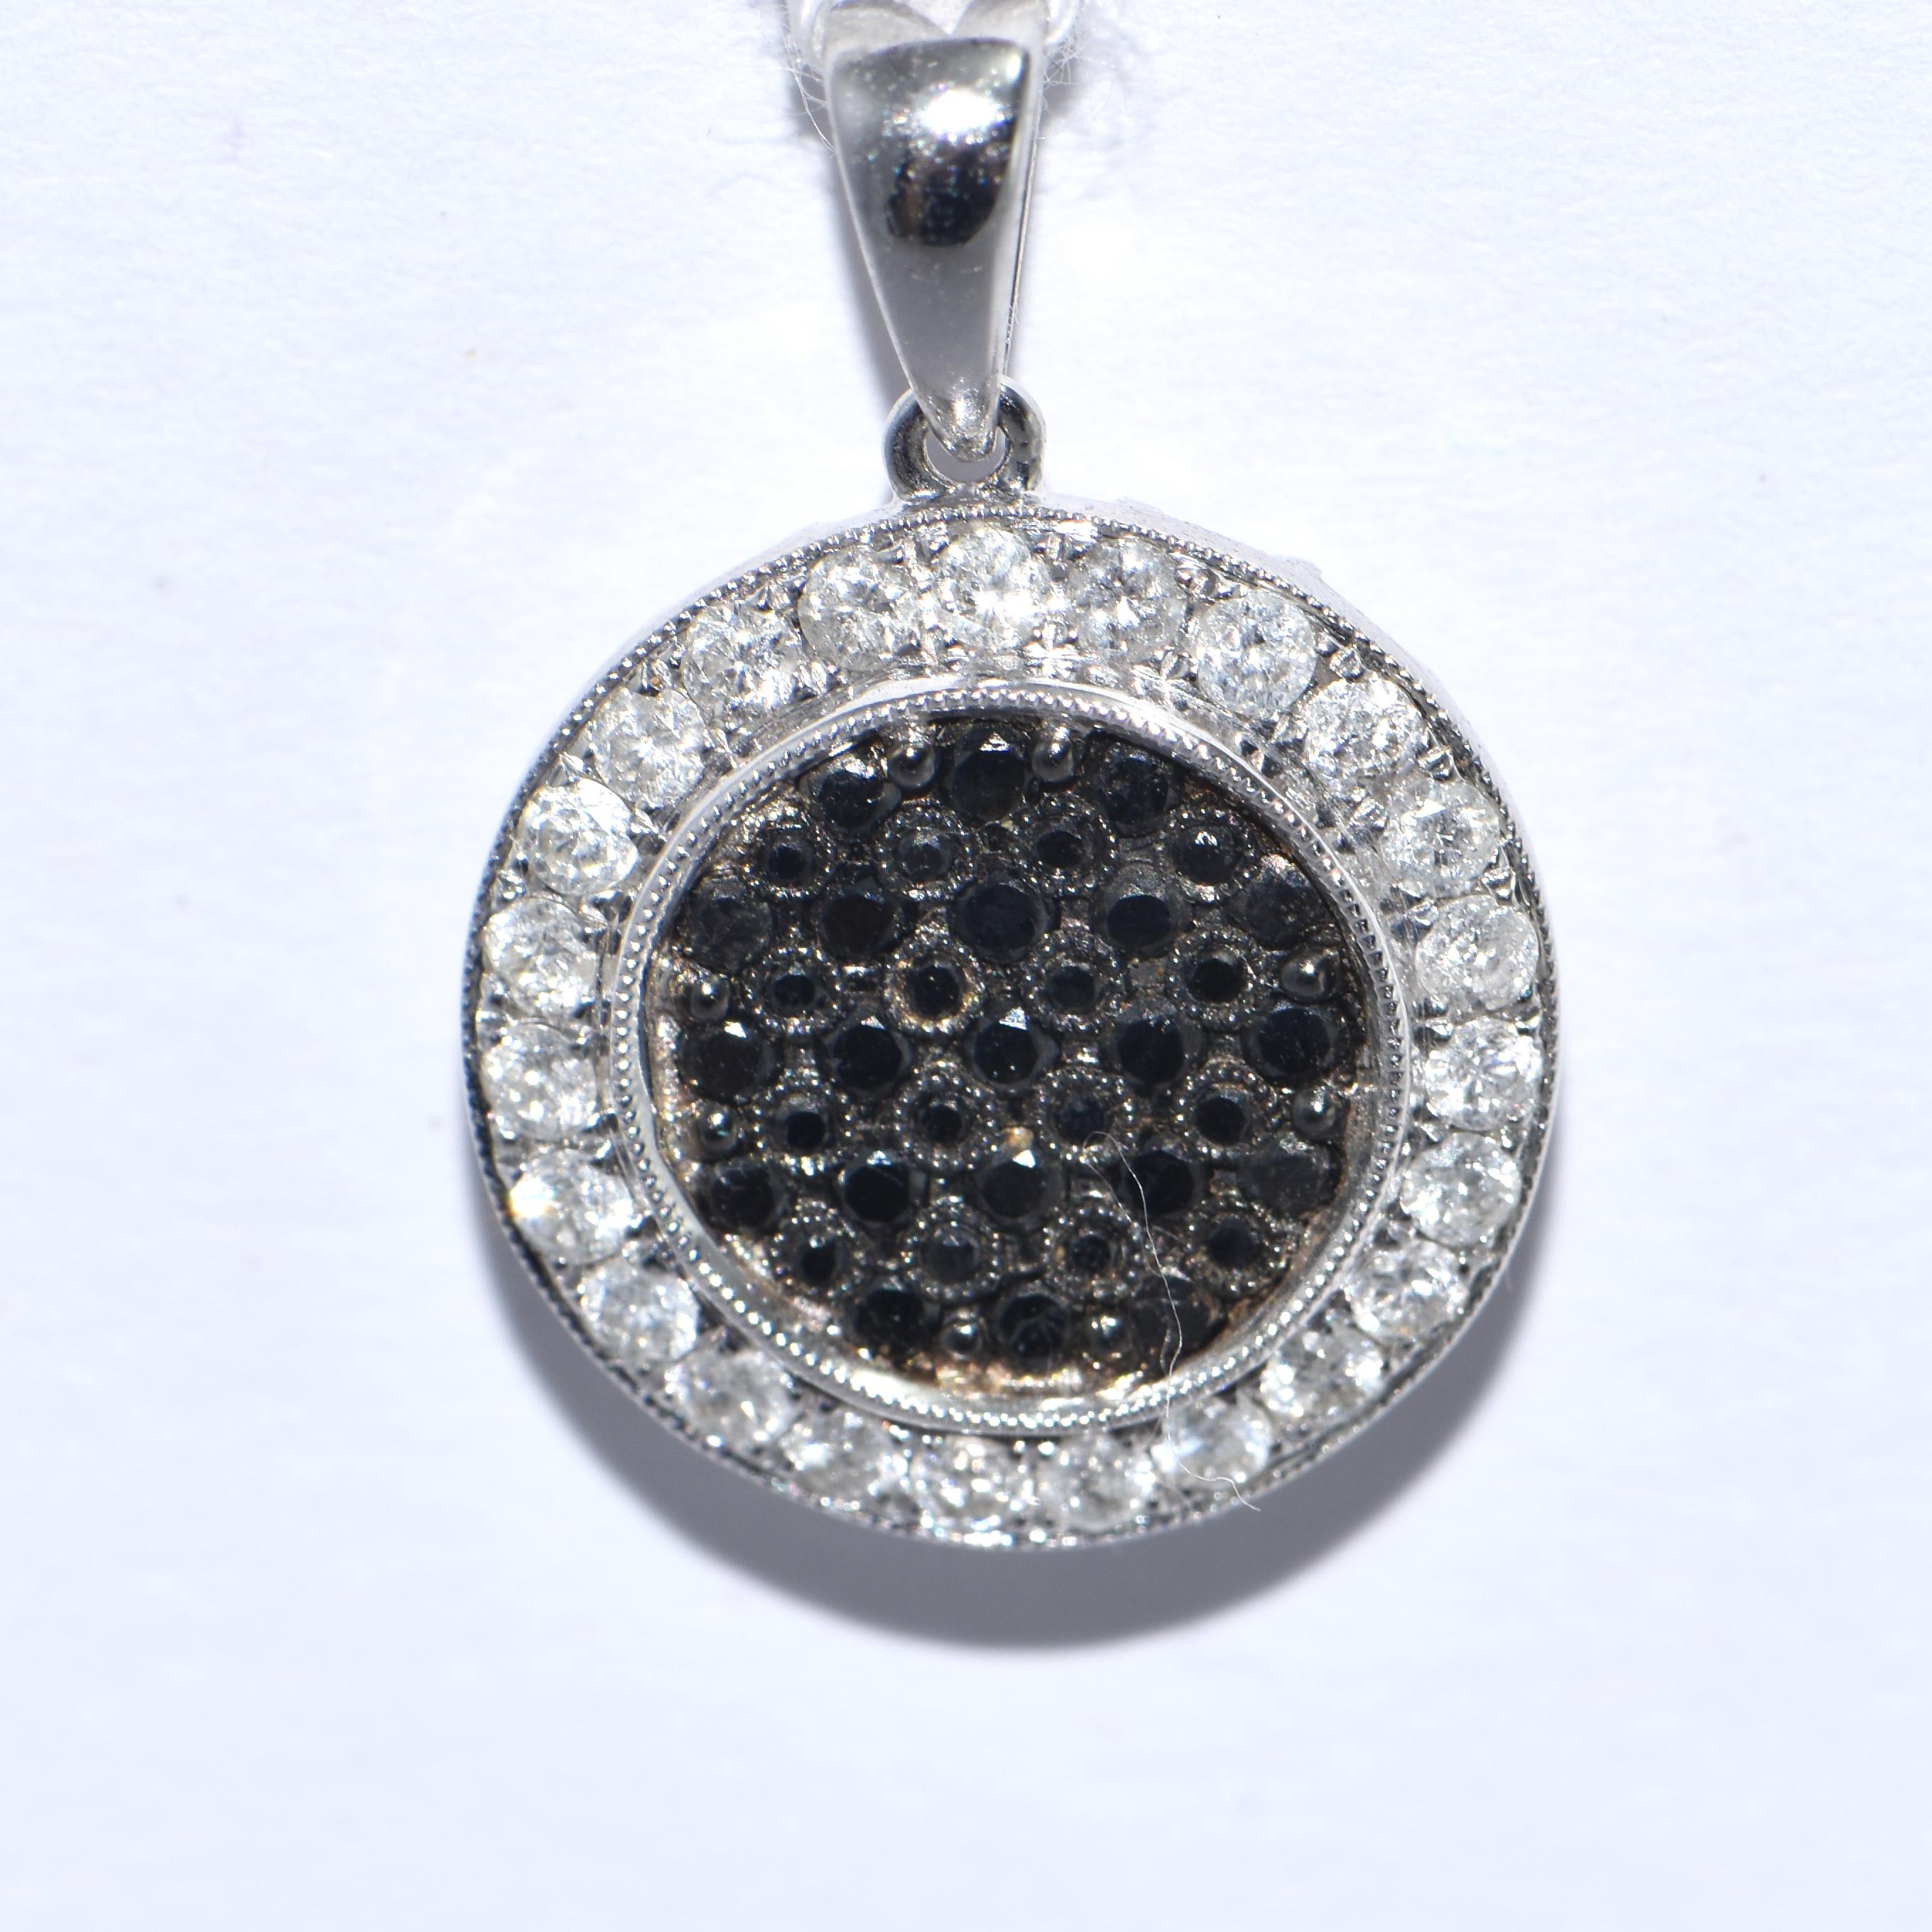 A Black and White Diamond Pendant

18 Carat White Gold
23 Round Brilliant Cut Diamonds 0.45ct
34 Round Brilliant Cut Brown Diamonds 0.38ct

A valuation report can be provided

FREE express postage usually 3-4 days Sydney to New York  
FREE